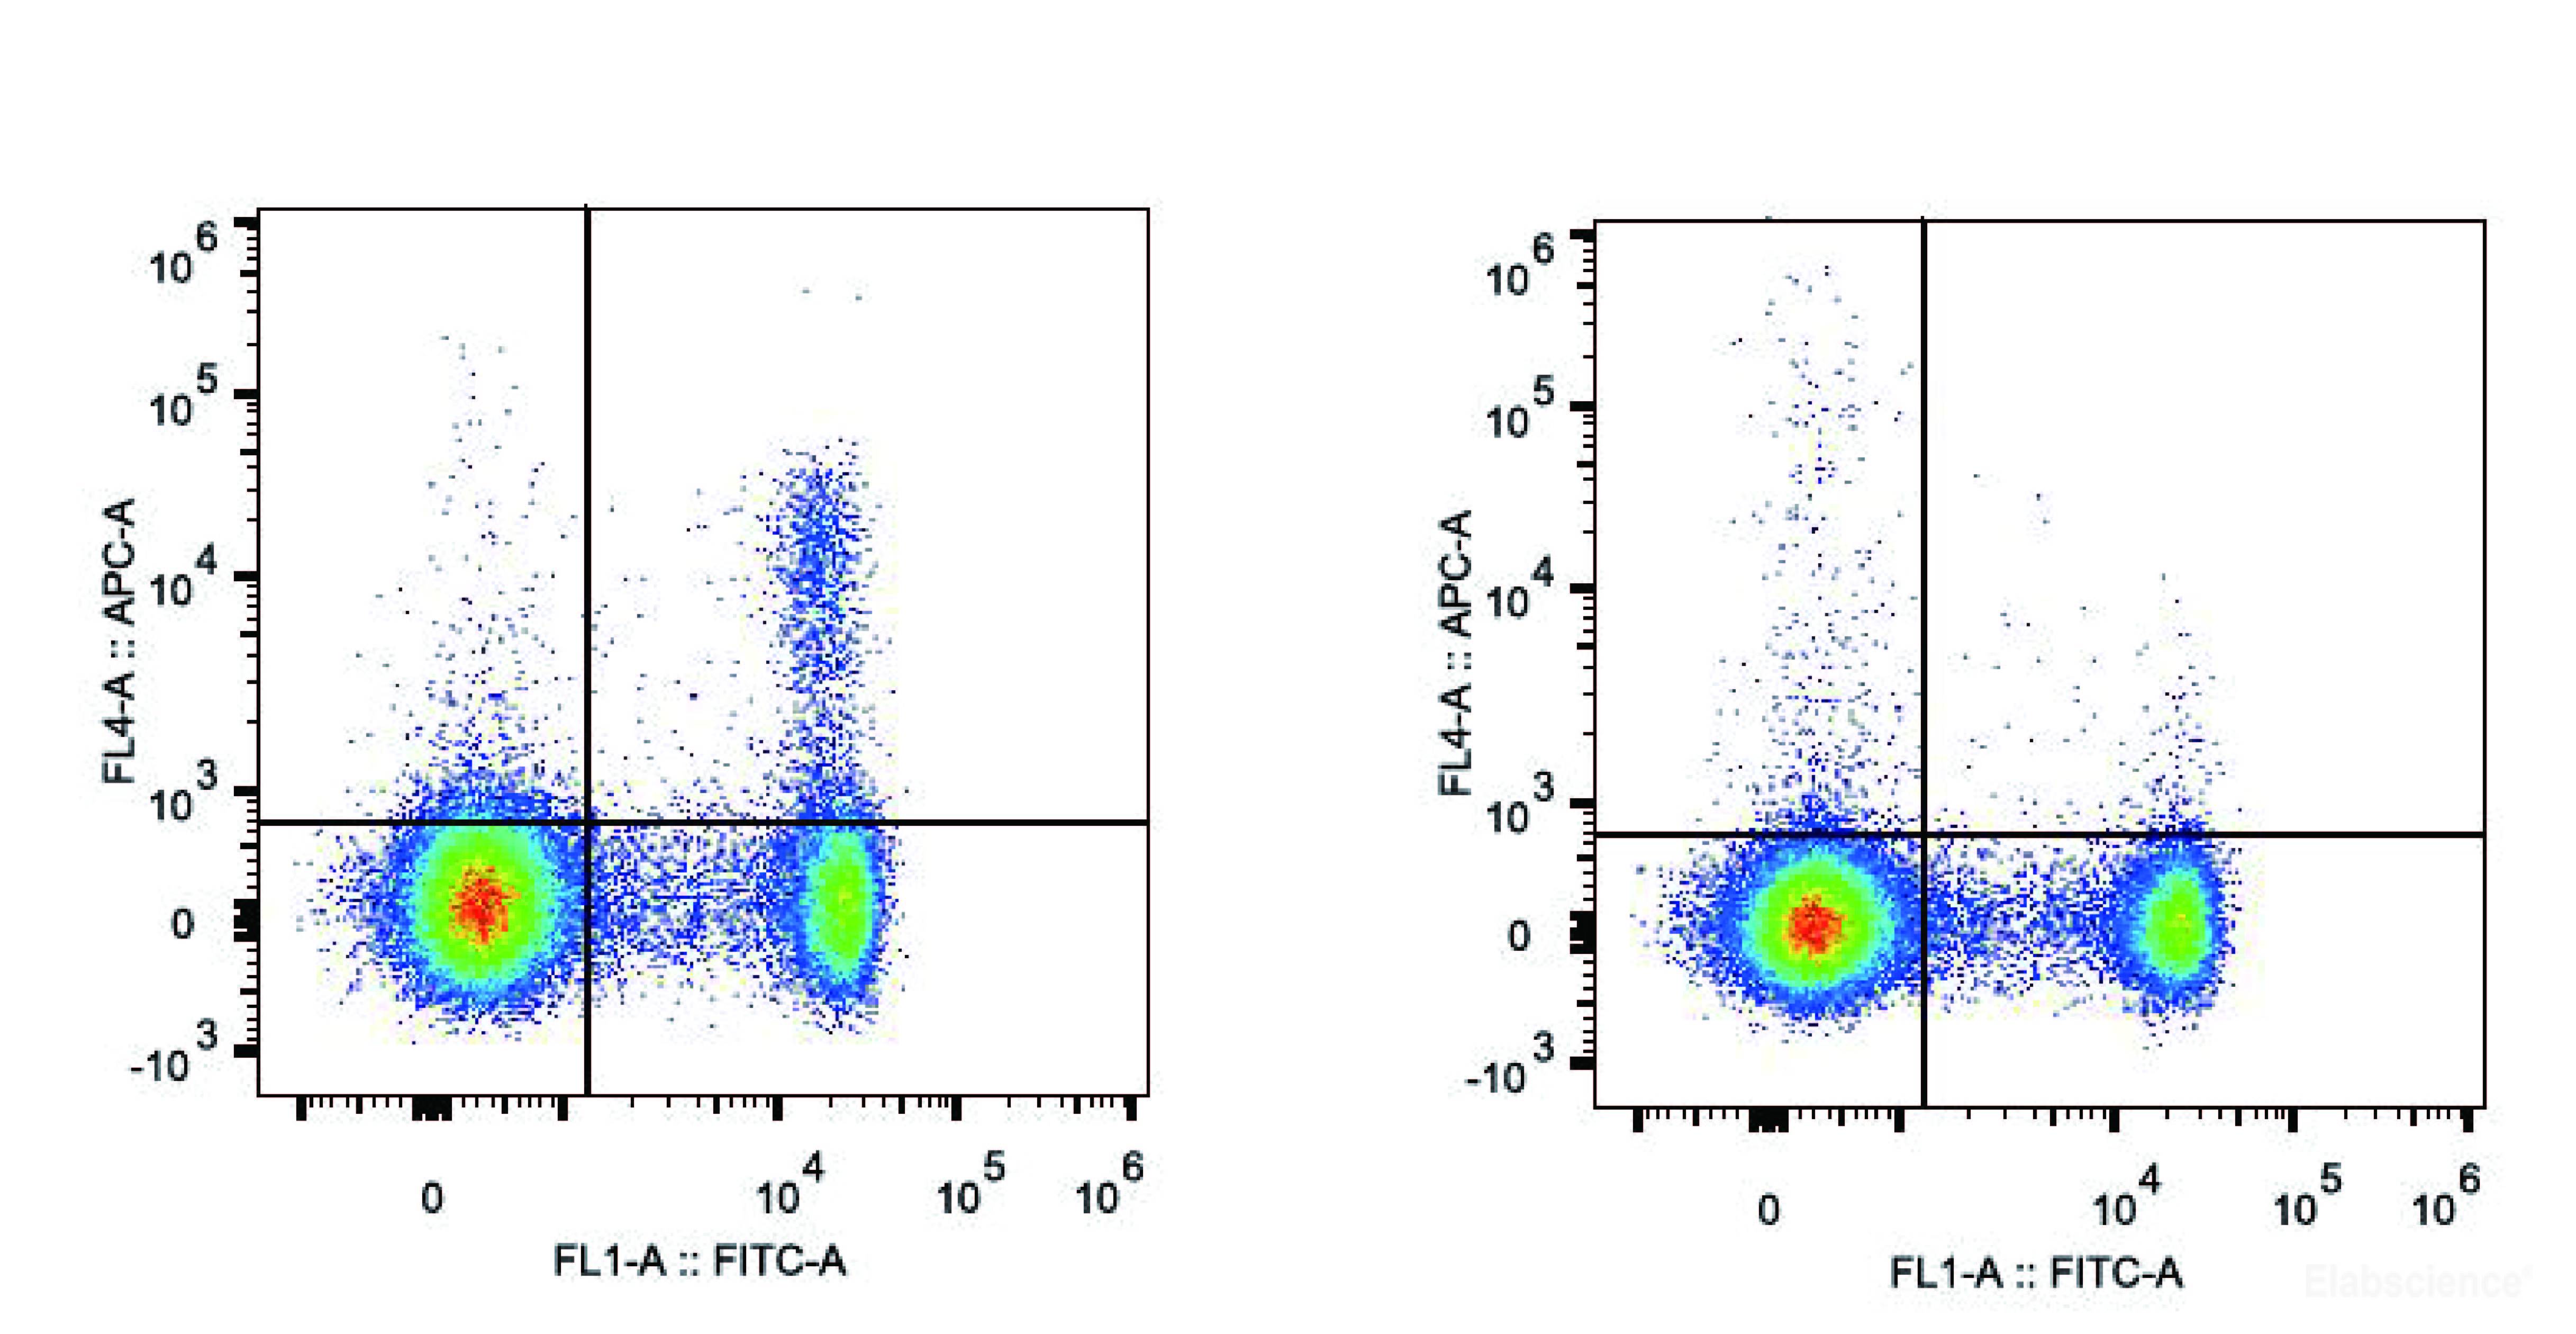 C57BL/6 murine splenocytes are stained with APC Anti-Mouse CD25 Antibody and FITC Anti-Mouse CD4 Antibody (Left). Splenocytes stained with FITC Anti-Mouse CD4 Antibody and Rat IgG1 Isotype Control APC (Right) are used as control.